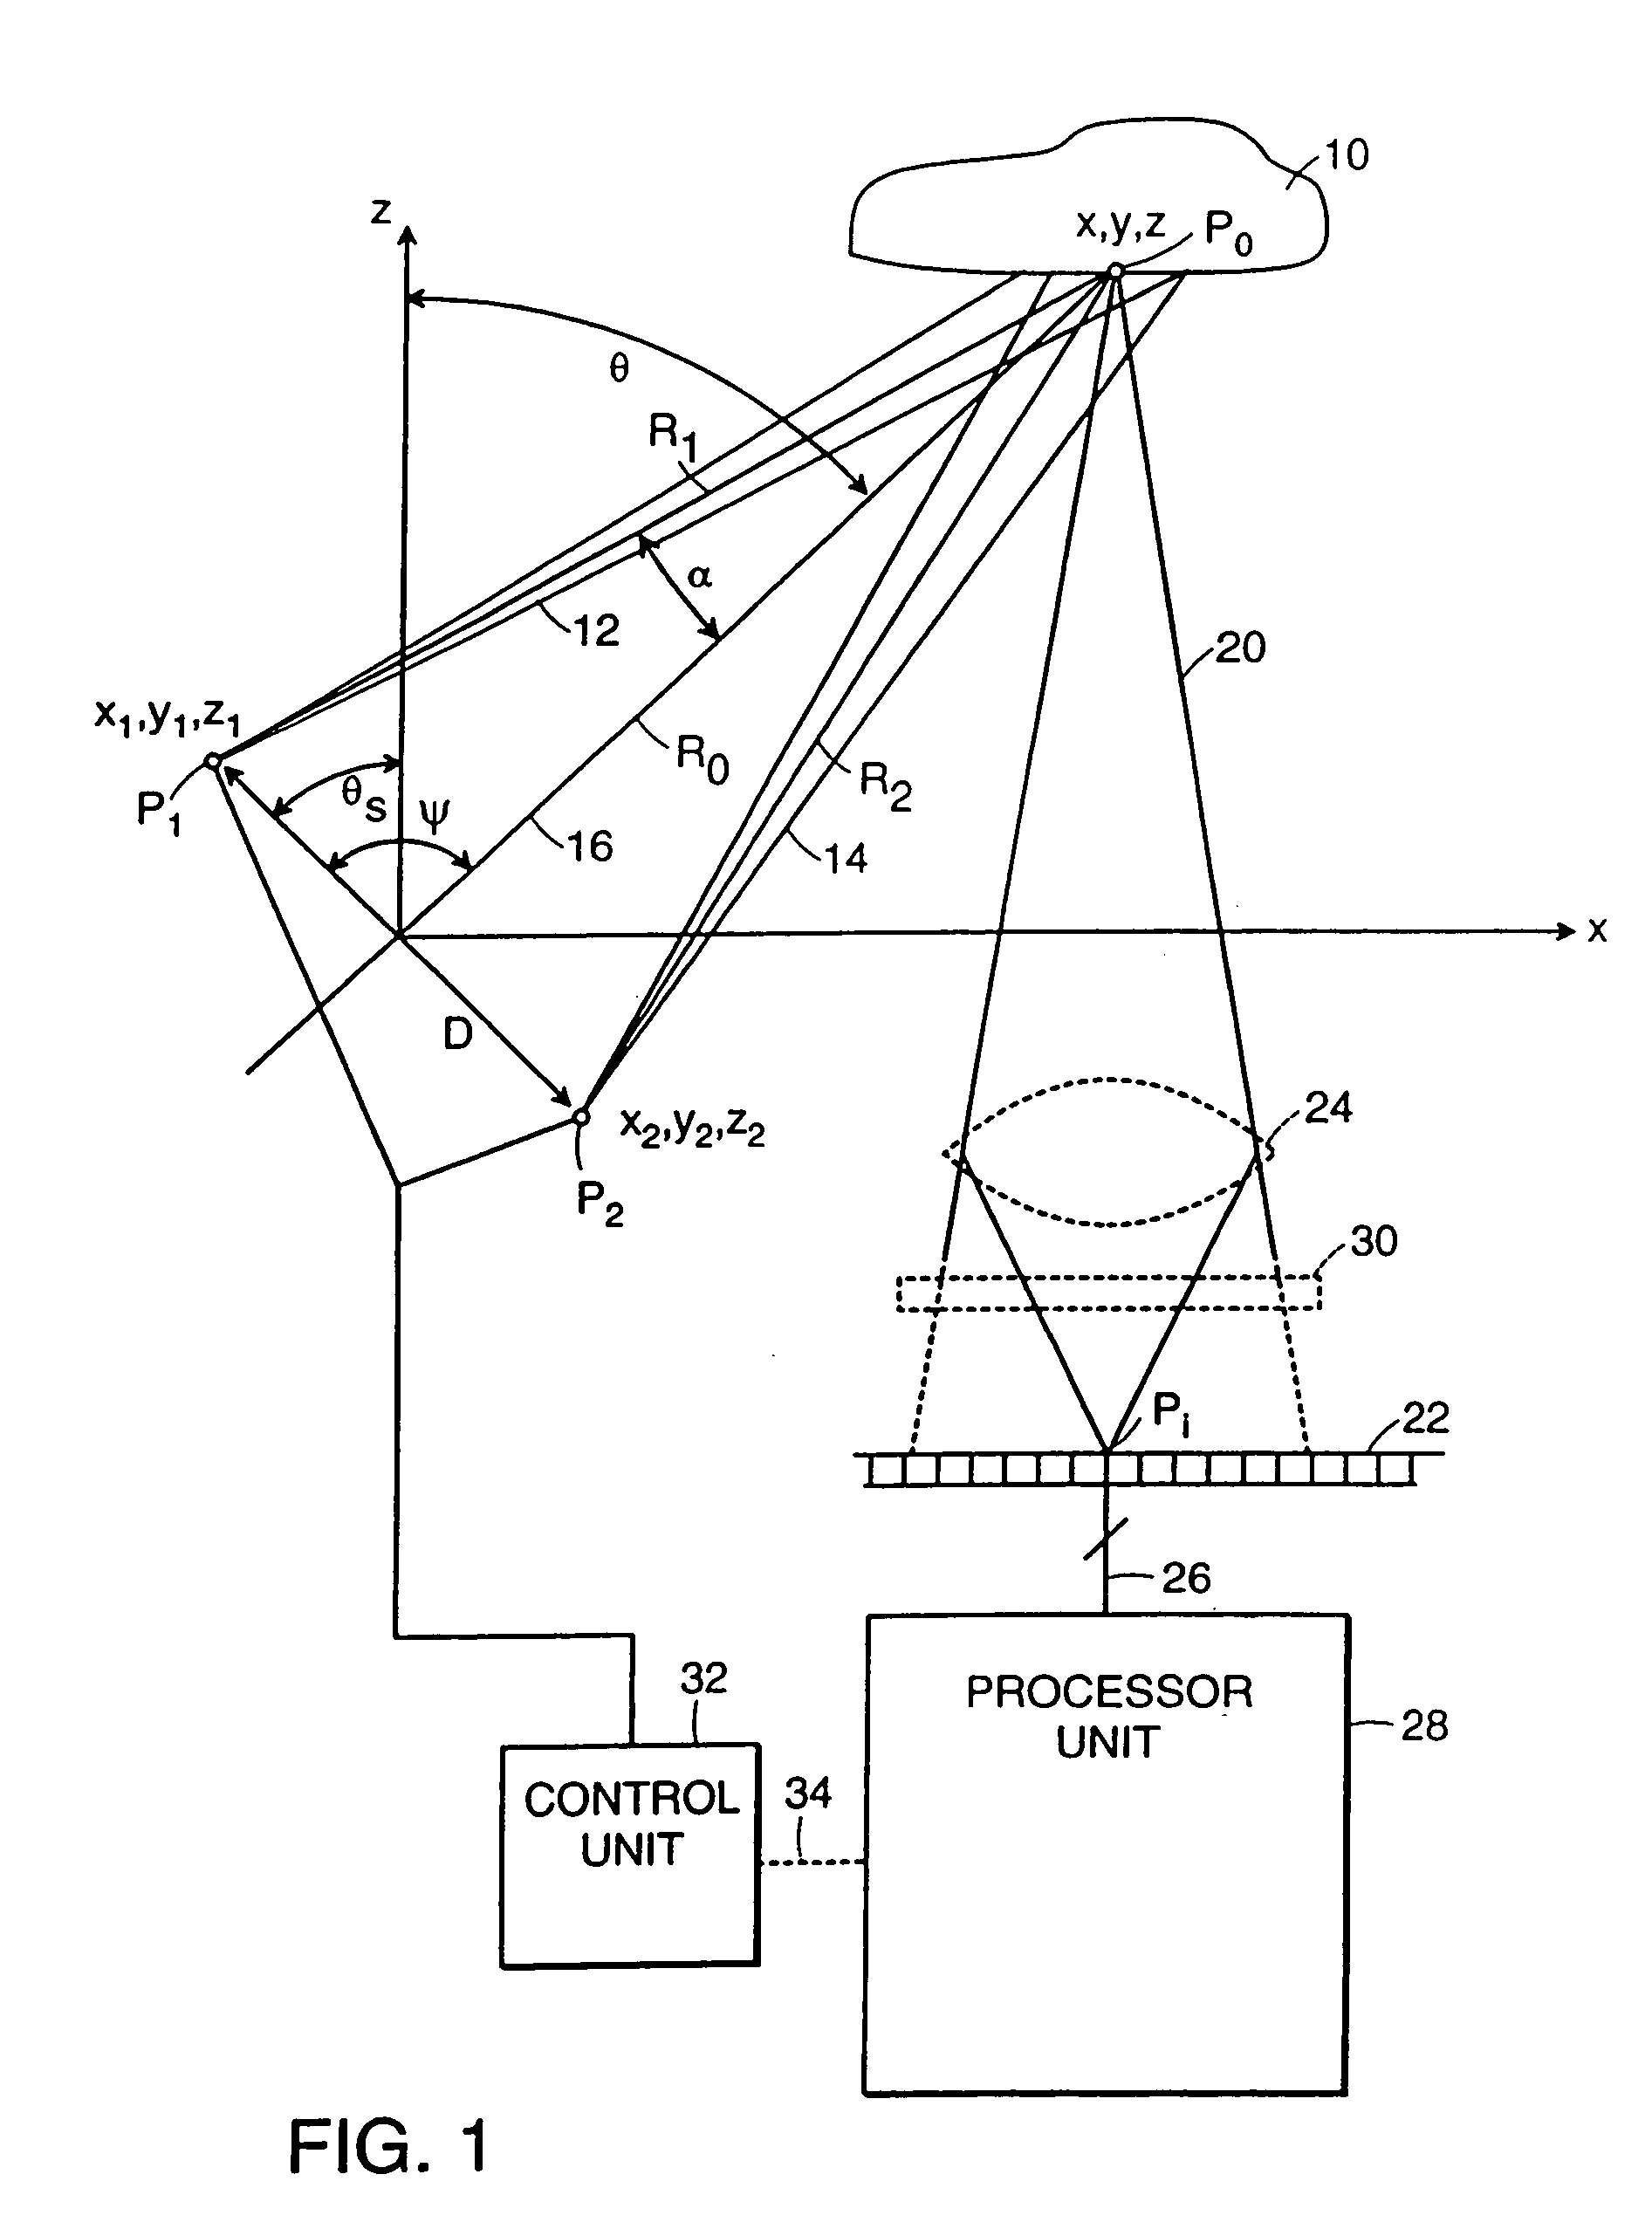 Apparatus and methods for surface contour measurement